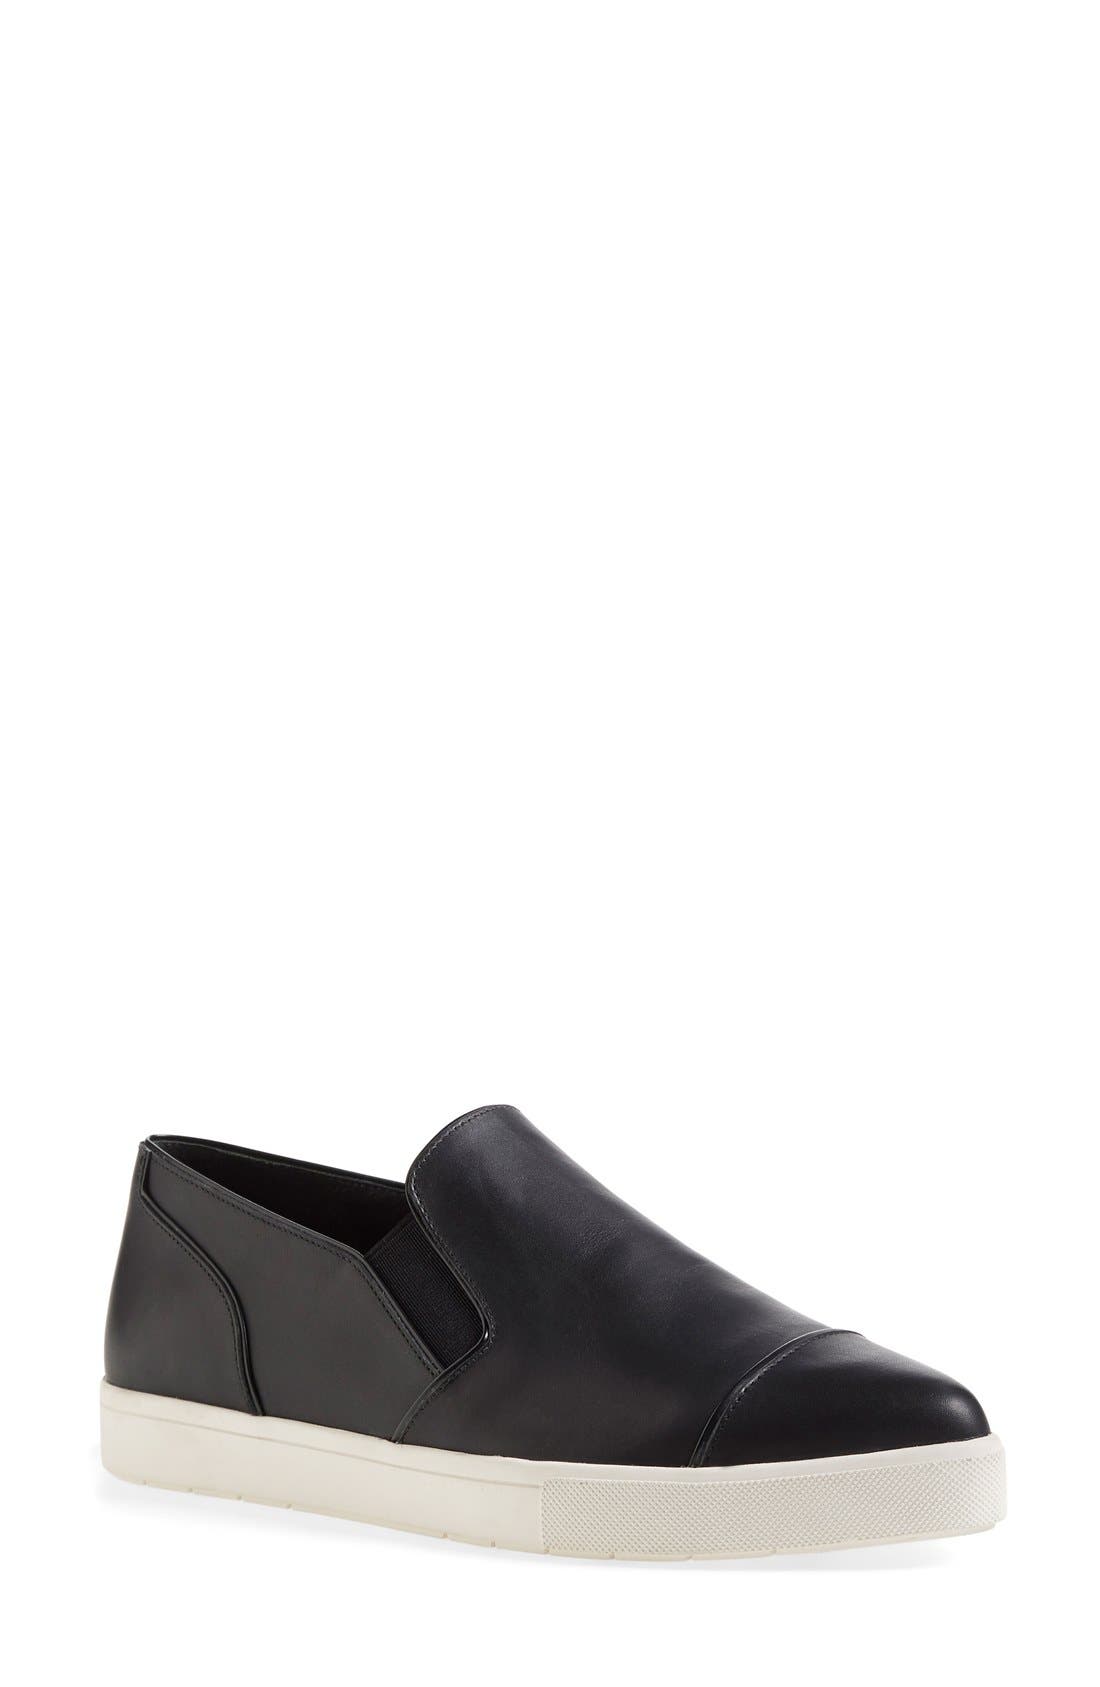 Vince 'Paeyre' Pointy Toe Slip-On 